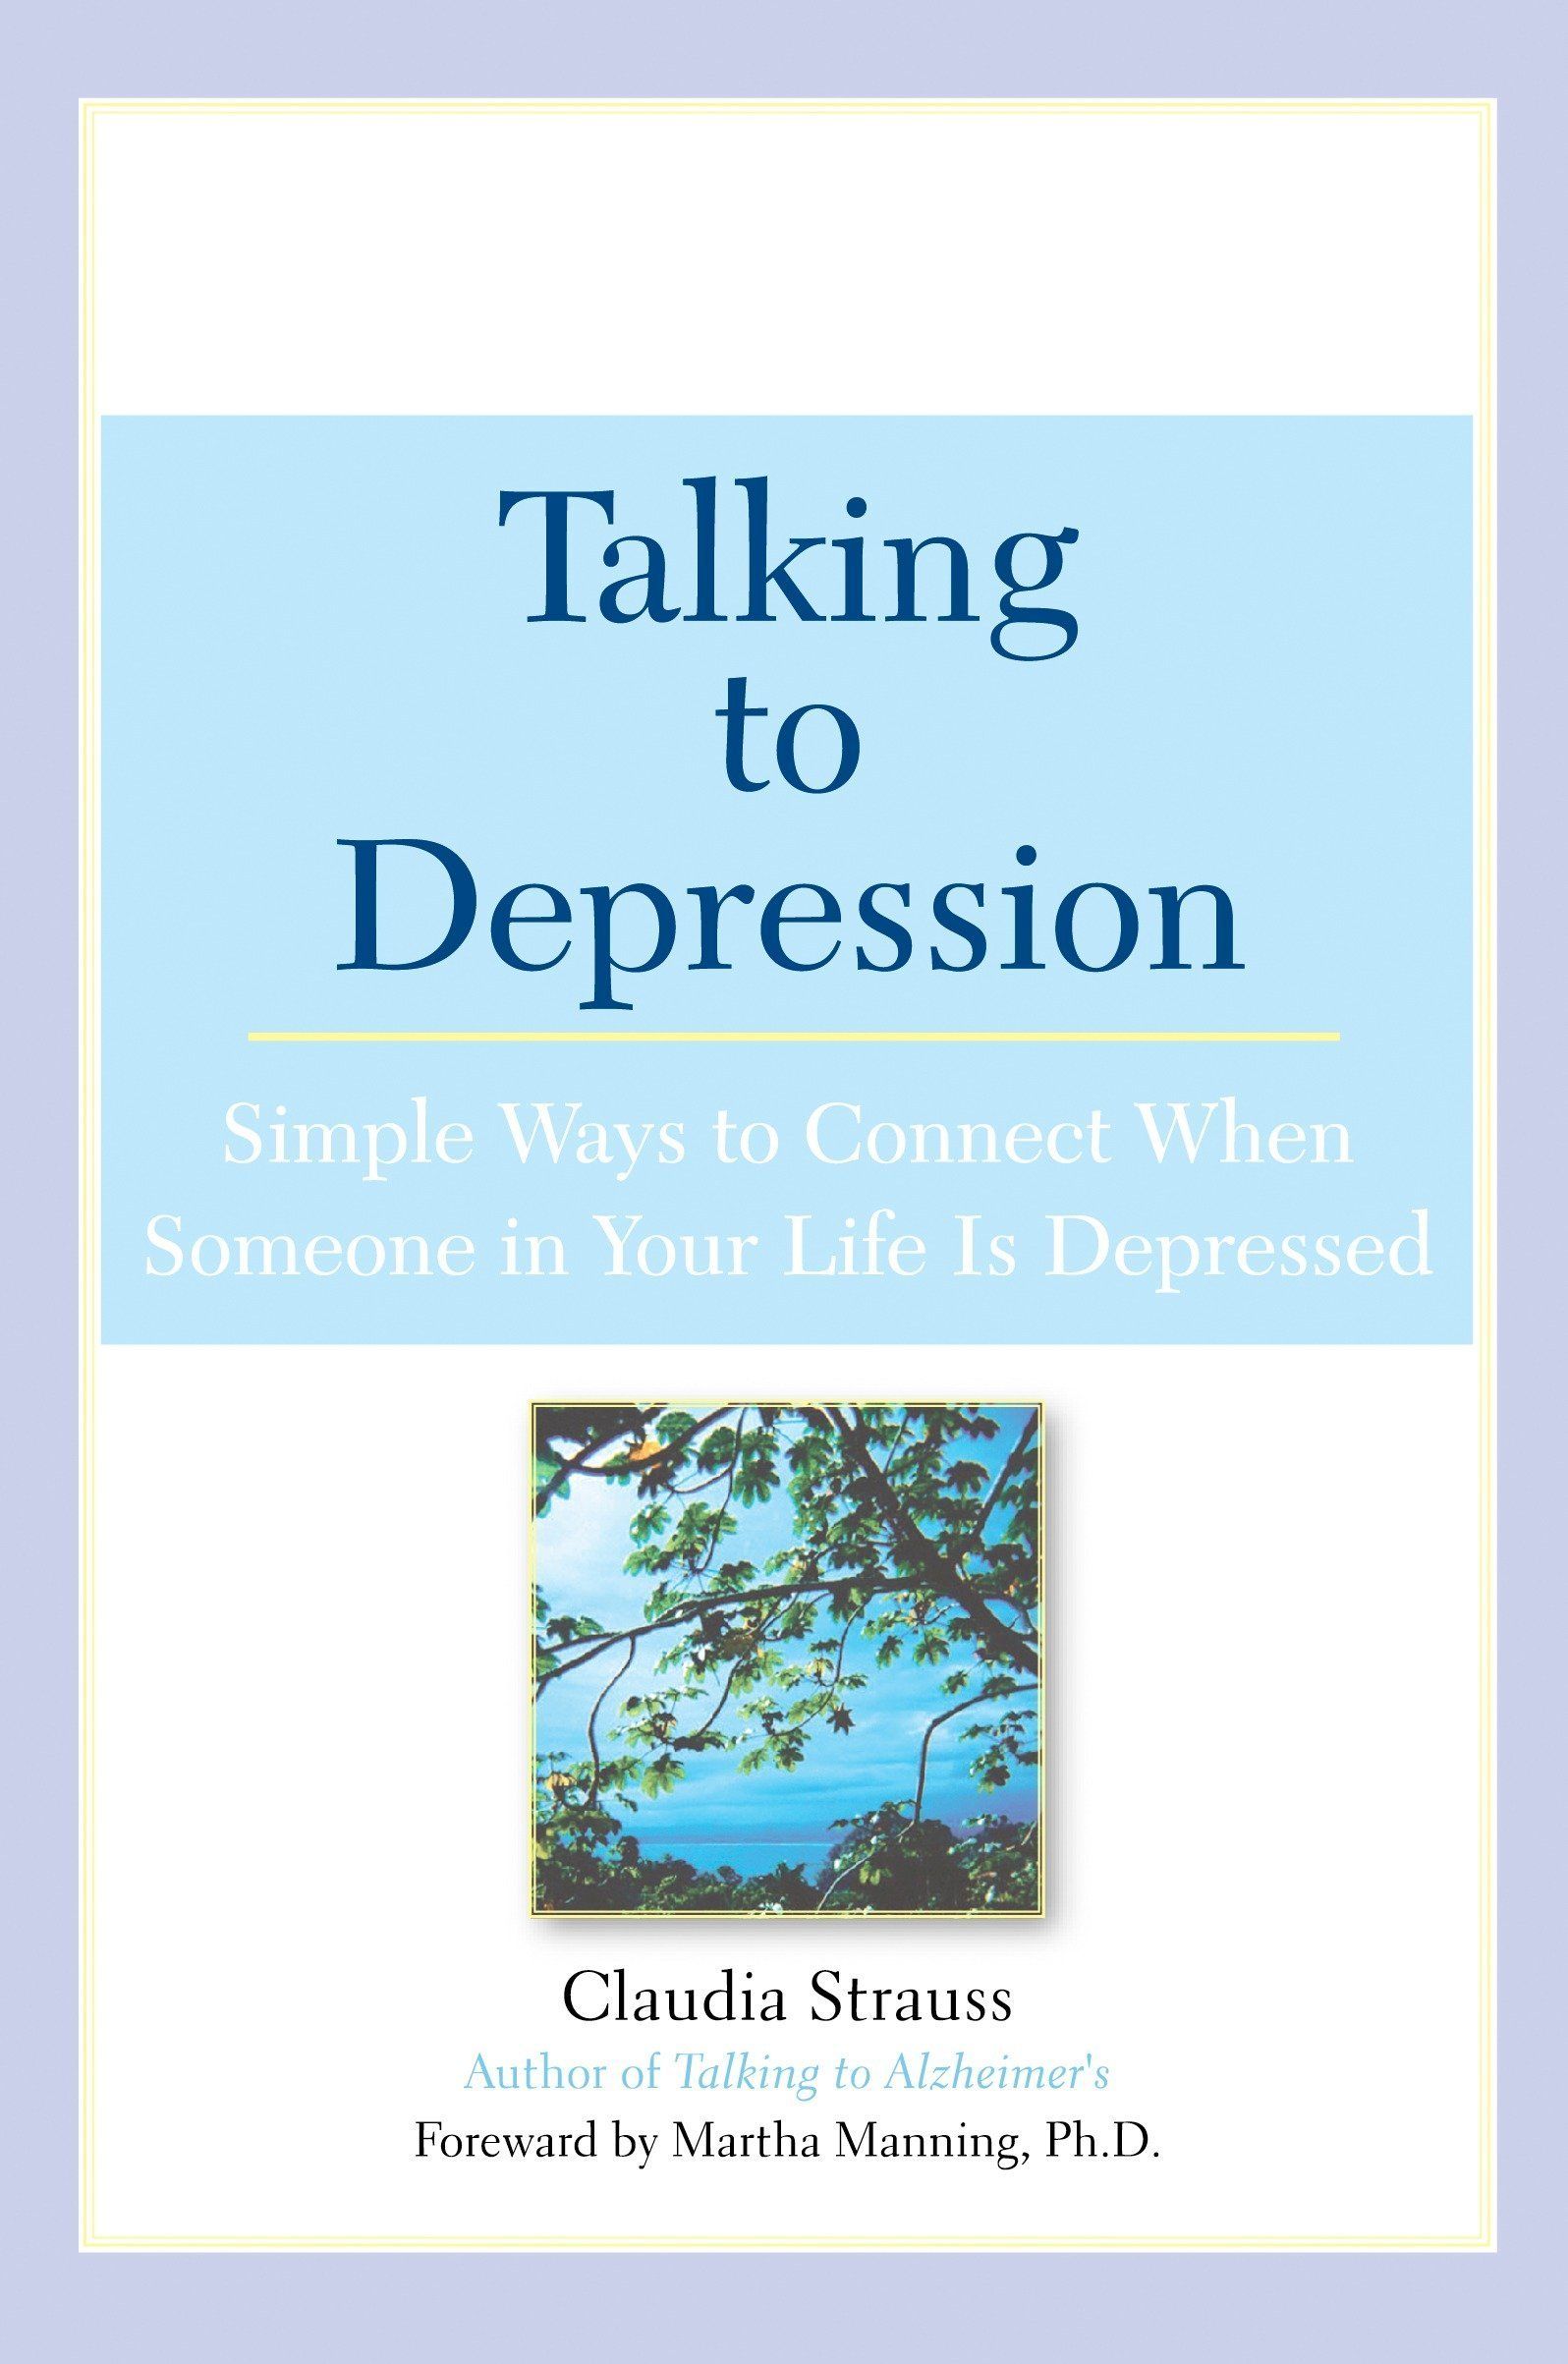 Book Cover - Talking to Depression: Simple Ways to Connect When Someone in Your Life is Depressed by Claudia J. Strauss (2006)